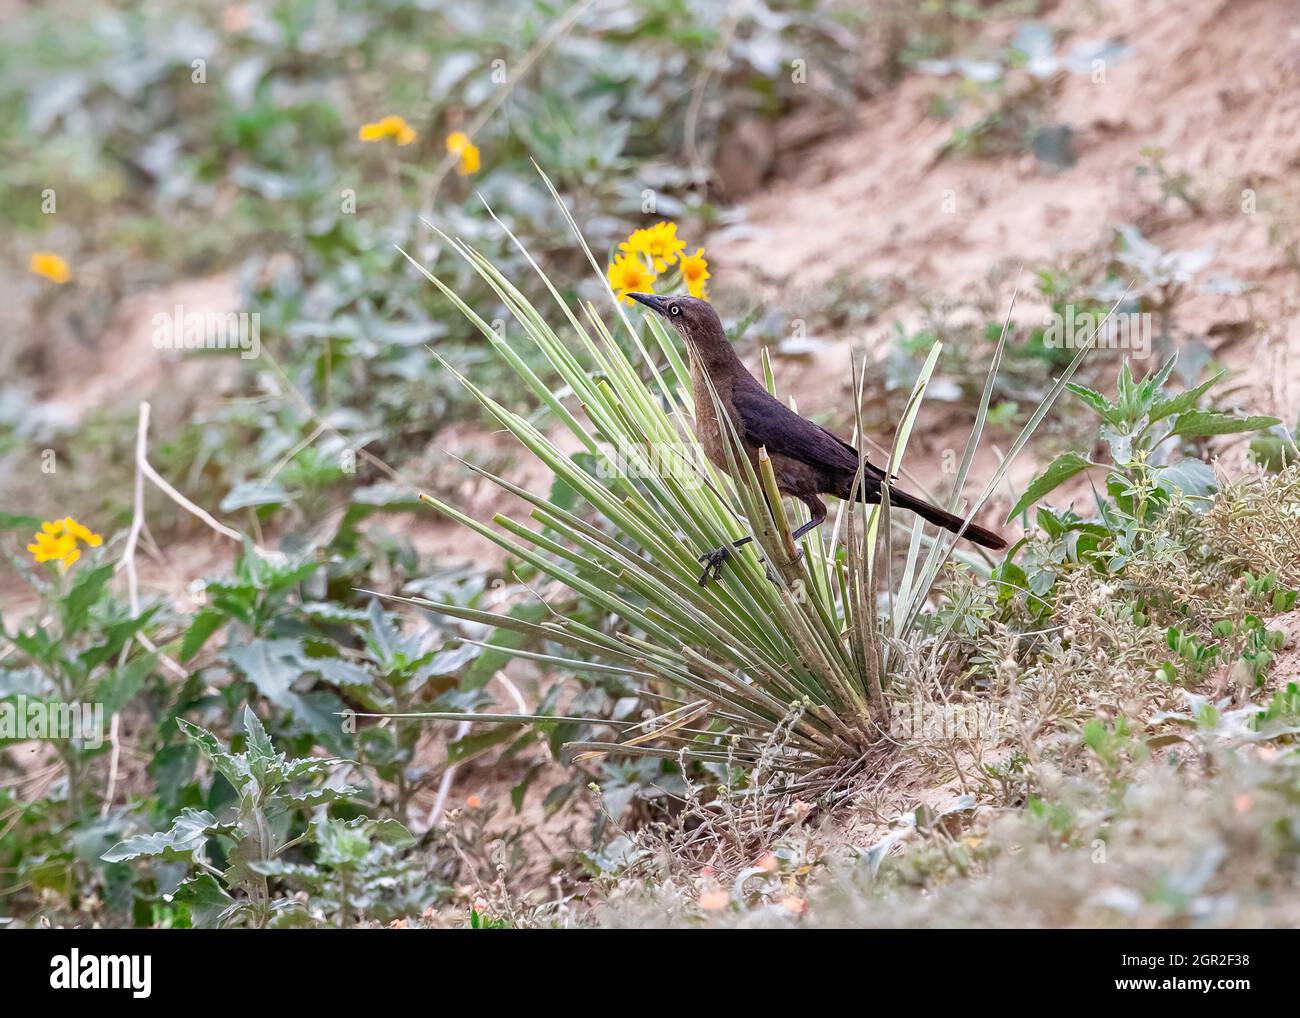 A Female Great-Tailed Grackle in a semi-arid habitat is cleverly perched on a spiky yucca plant. Stock Photo